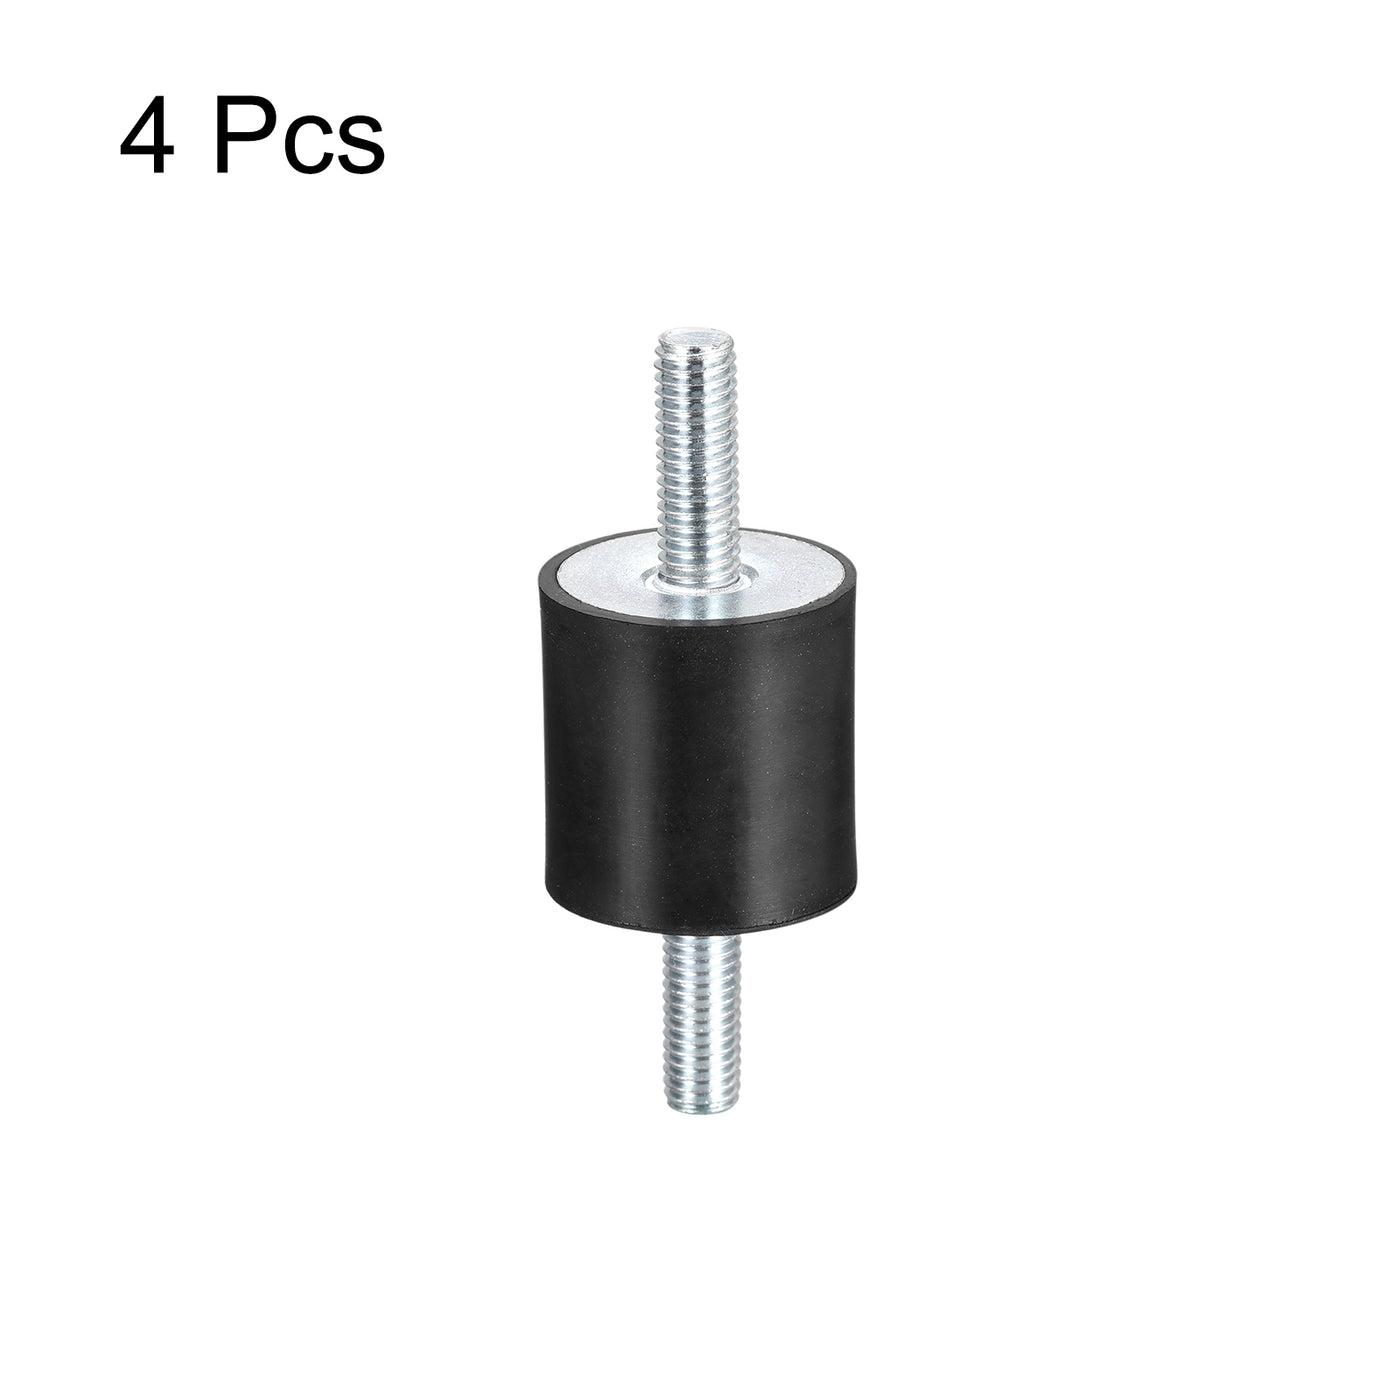 uxcell Uxcell Rubber Mounts 4pcs M8x23mm Male Vibration Isolator Shock Absorber D30mmxH30mm